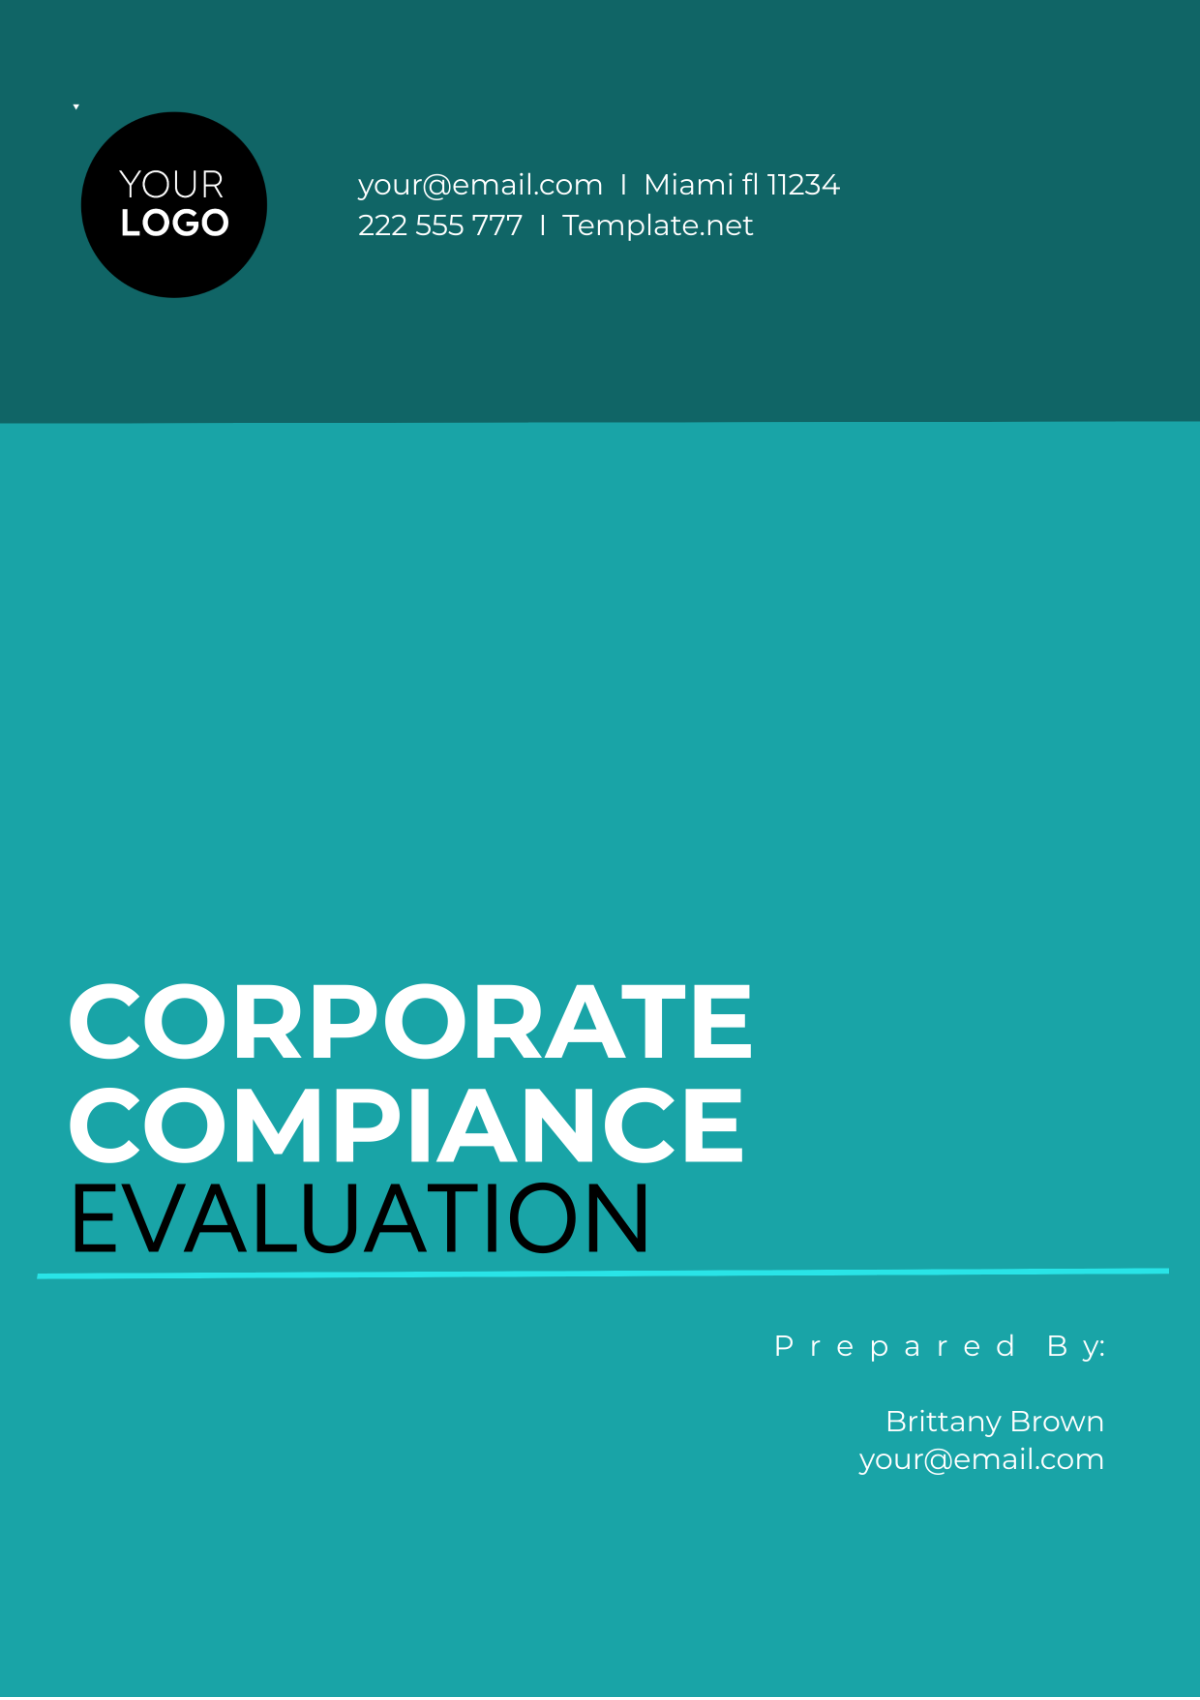 Free Evaluation Of Corporate Compliance Template